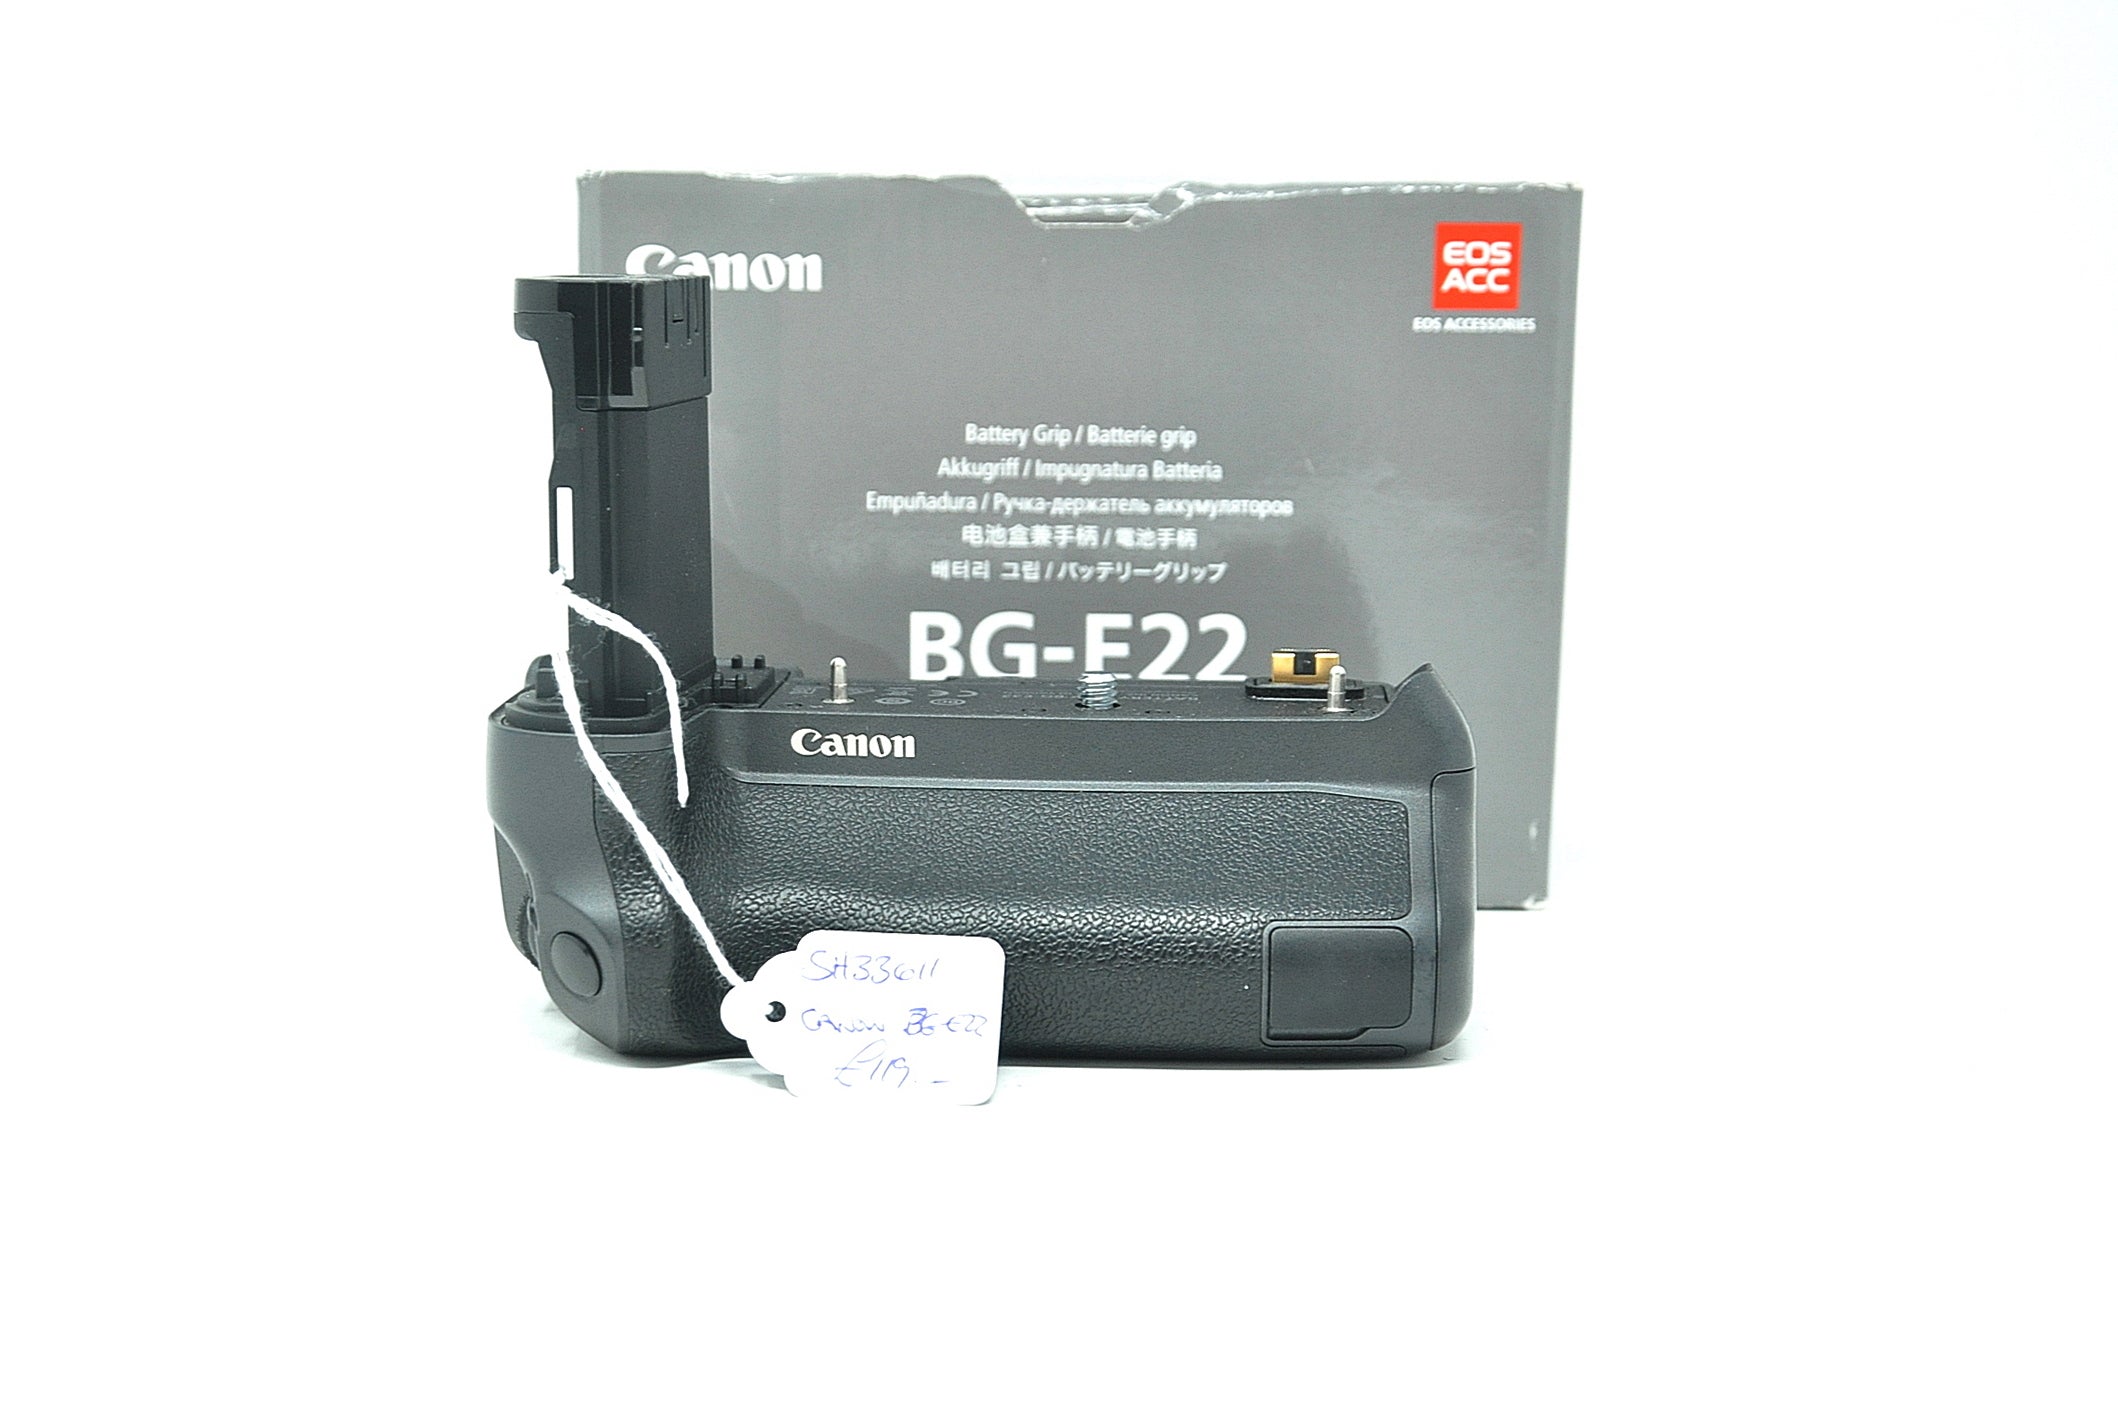 Used Canon BG-E22 battery grip for EOS R (Boxed SH33611)